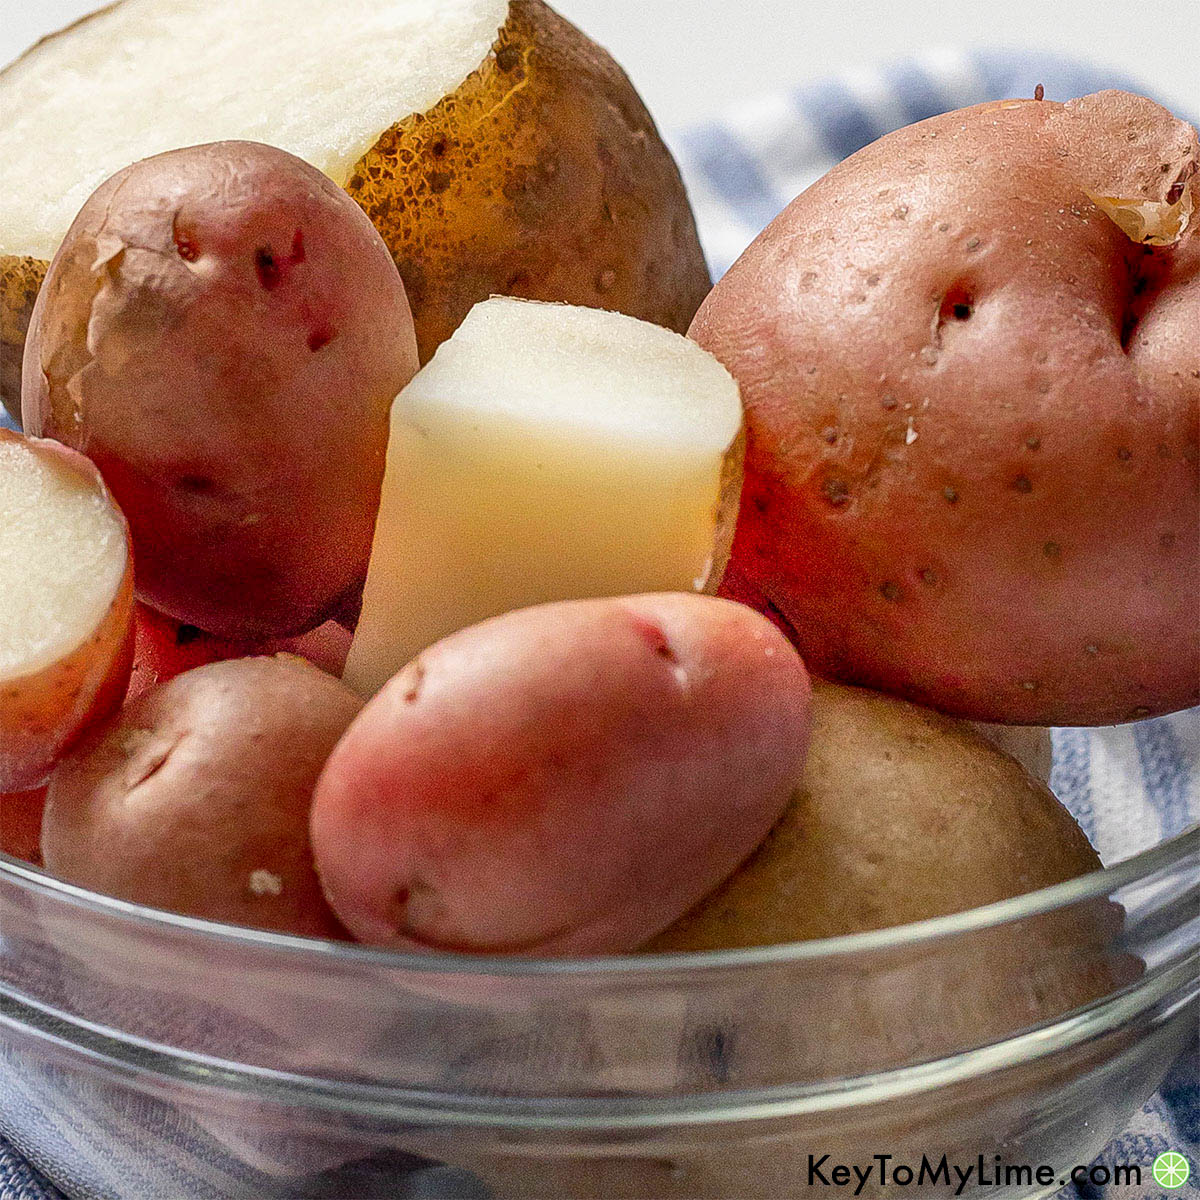 The best how to boil potatoes recipe.